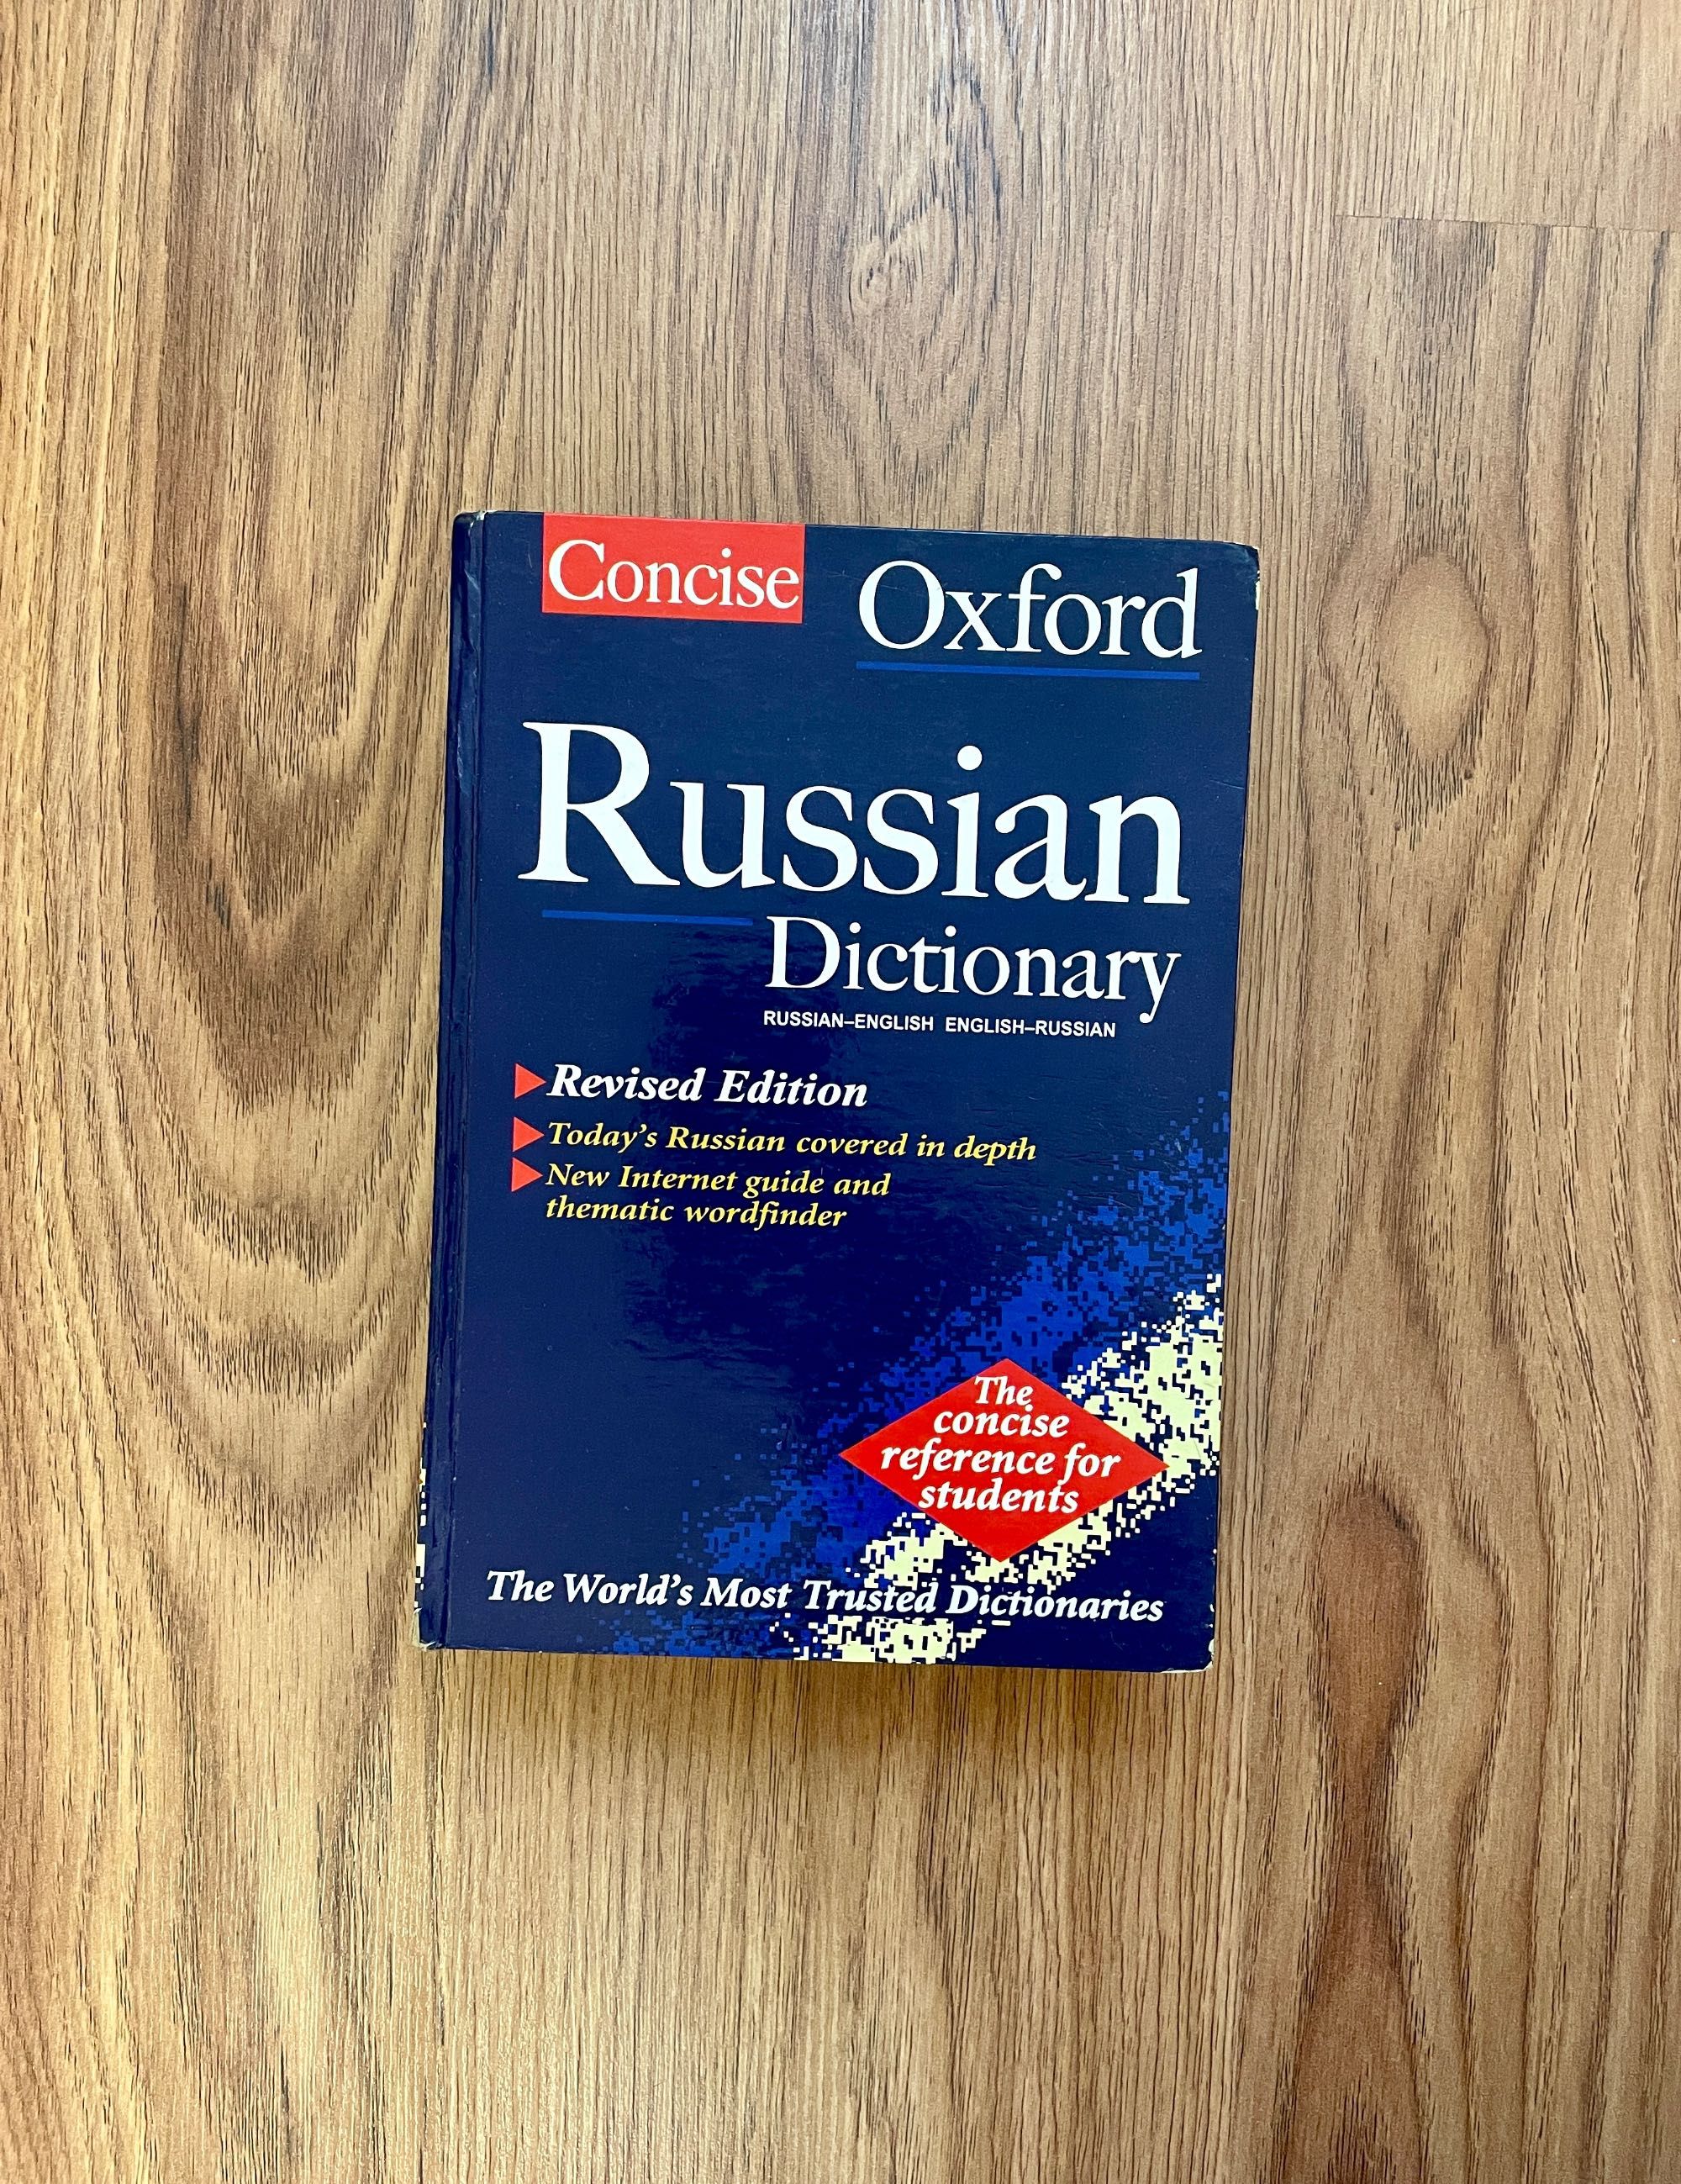 Concise Oxford Russian Dictionary (2004, revised edition)